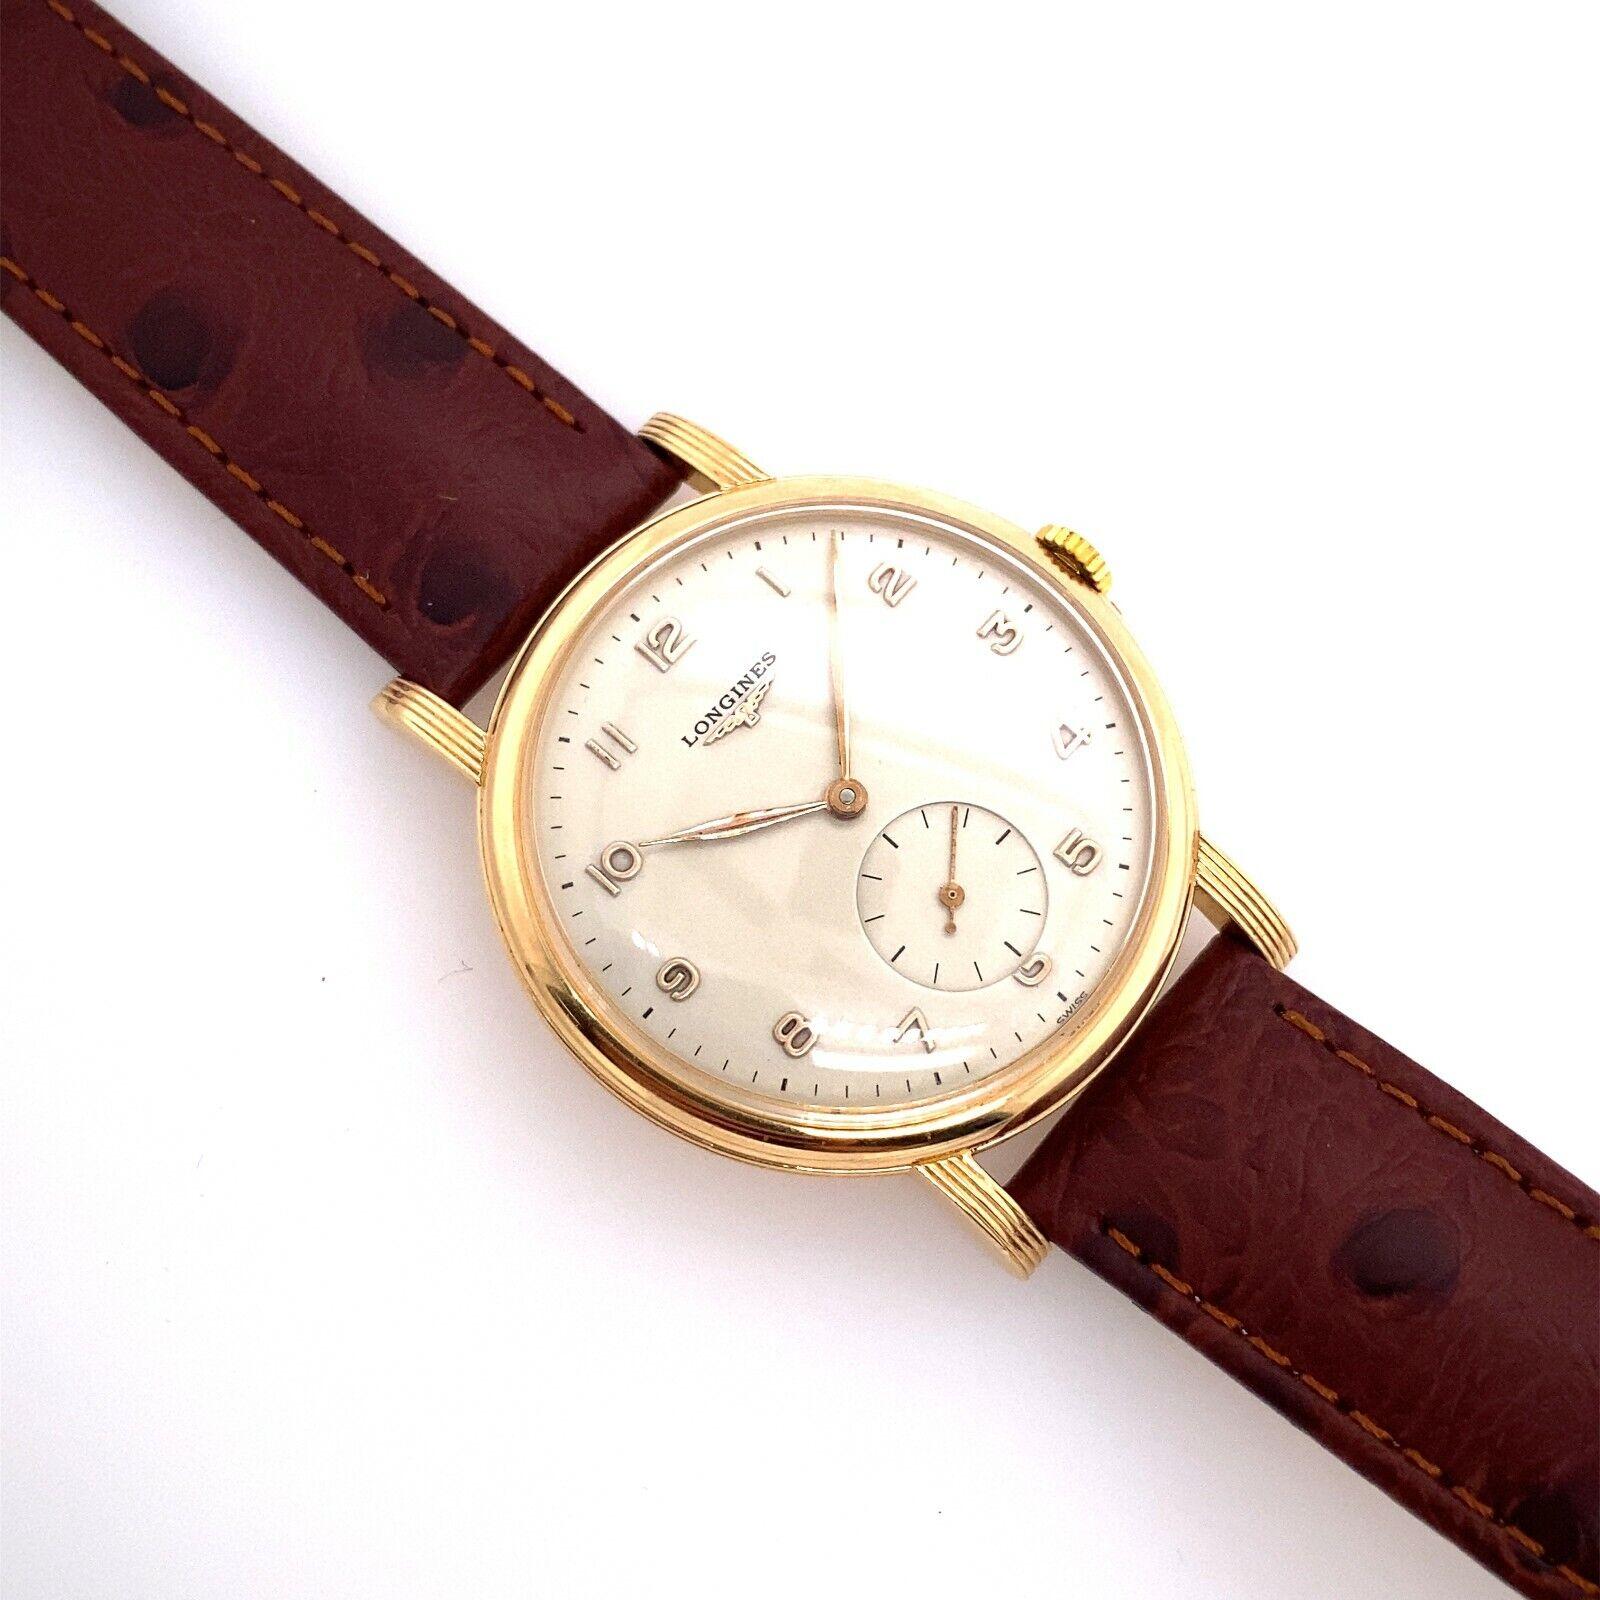 Vintage 18ct Rosy/Yellow Gold 38mm Longines Mechanical Wristwatch

Additional Information:
Fully Serviced In Perfect Working Condition
Case Size: 38mm
Case Thickness: 8mm
Lug Width: 18 mm
Number of Jewels: 17
Case Material: 9ct gold
Total Weight: